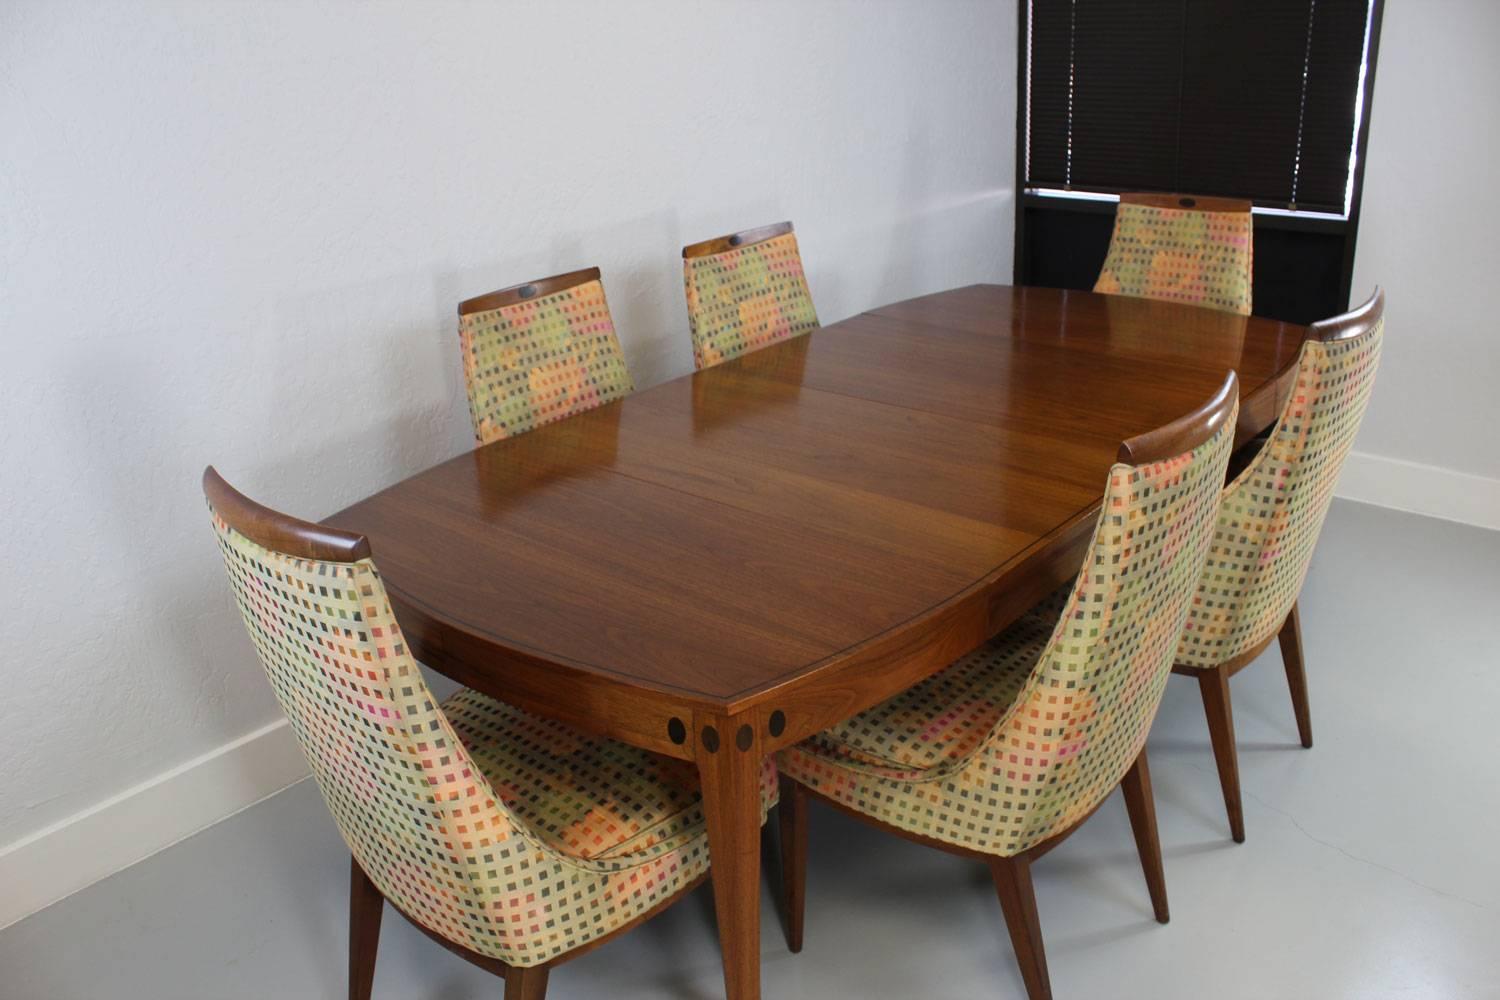 This exceptional dining table and chairs are from Kipp Stewart's 